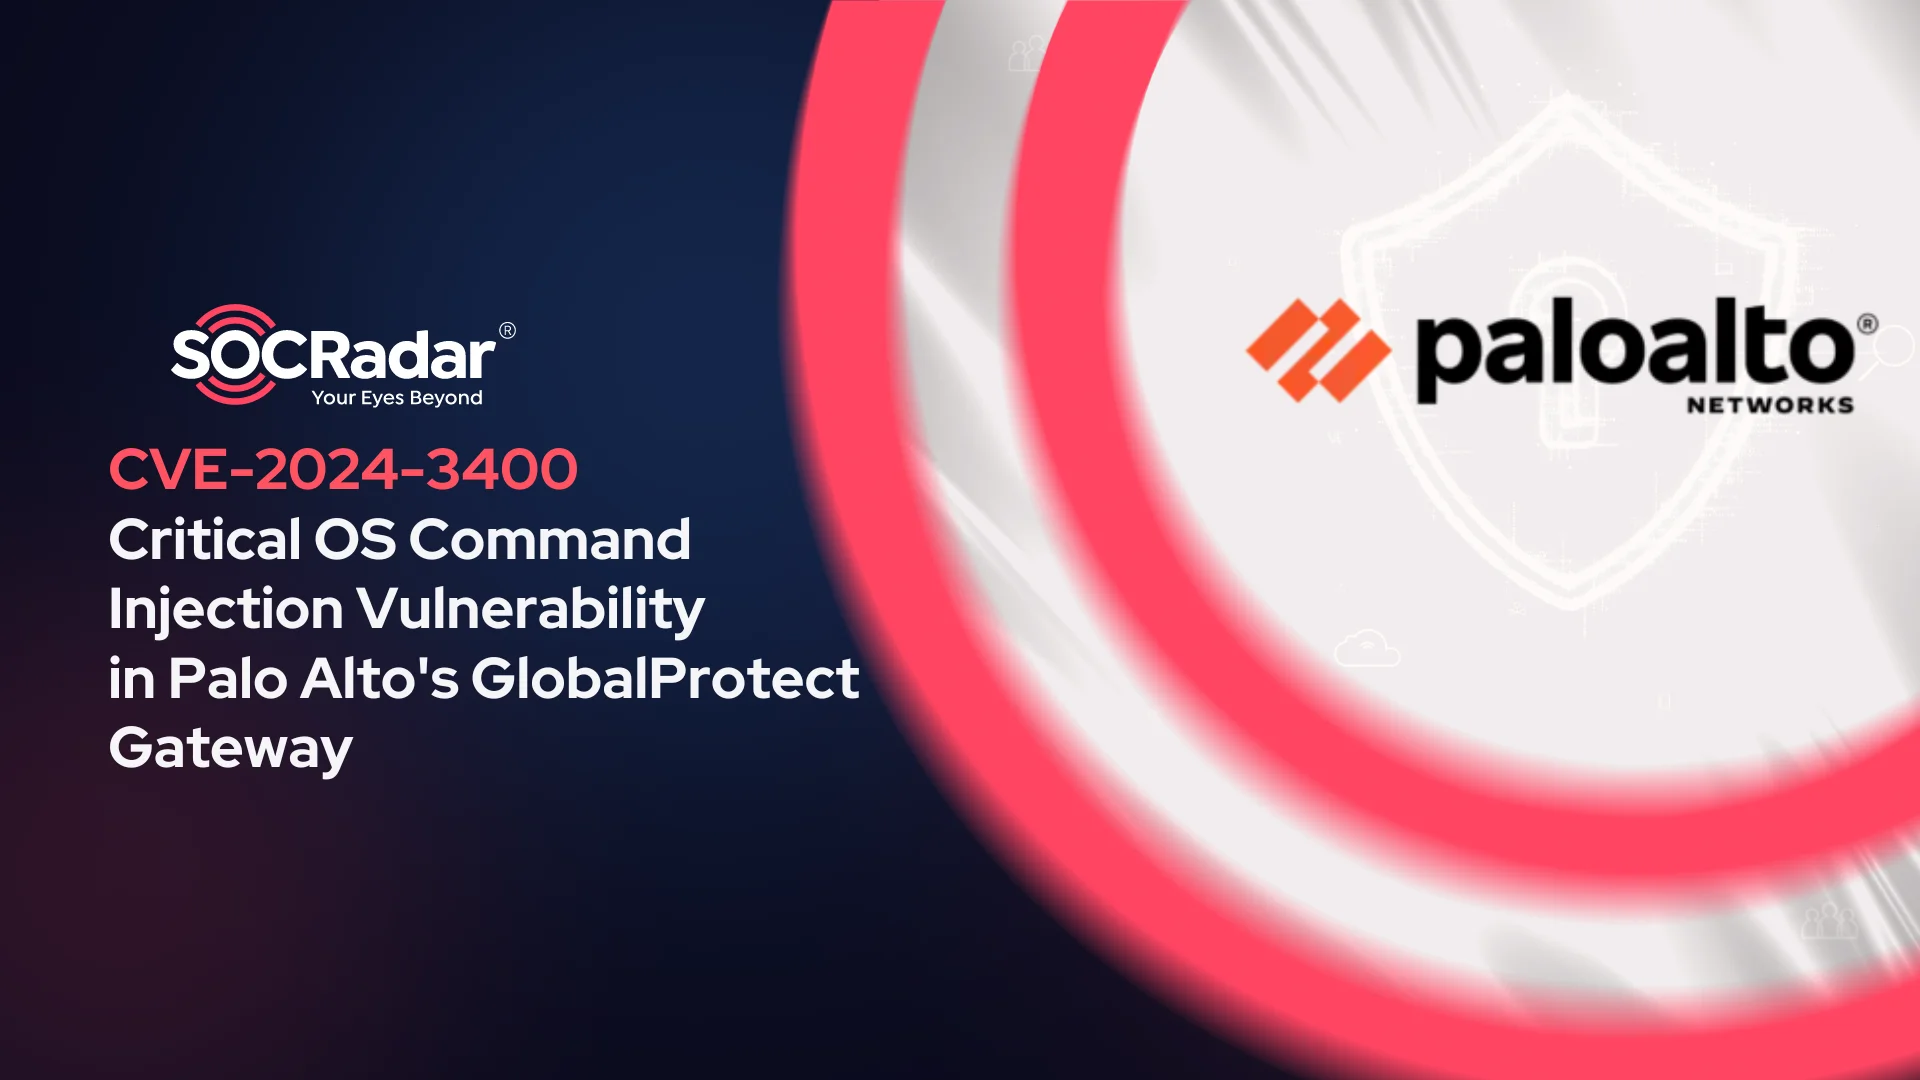 SOCRadar® Cyber Intelligence Inc. | Critical OS Command Injection Vulnerability in Palo Alto's GlobalProtect Gateway: CVE-2024-3400. The patch is not available yet.